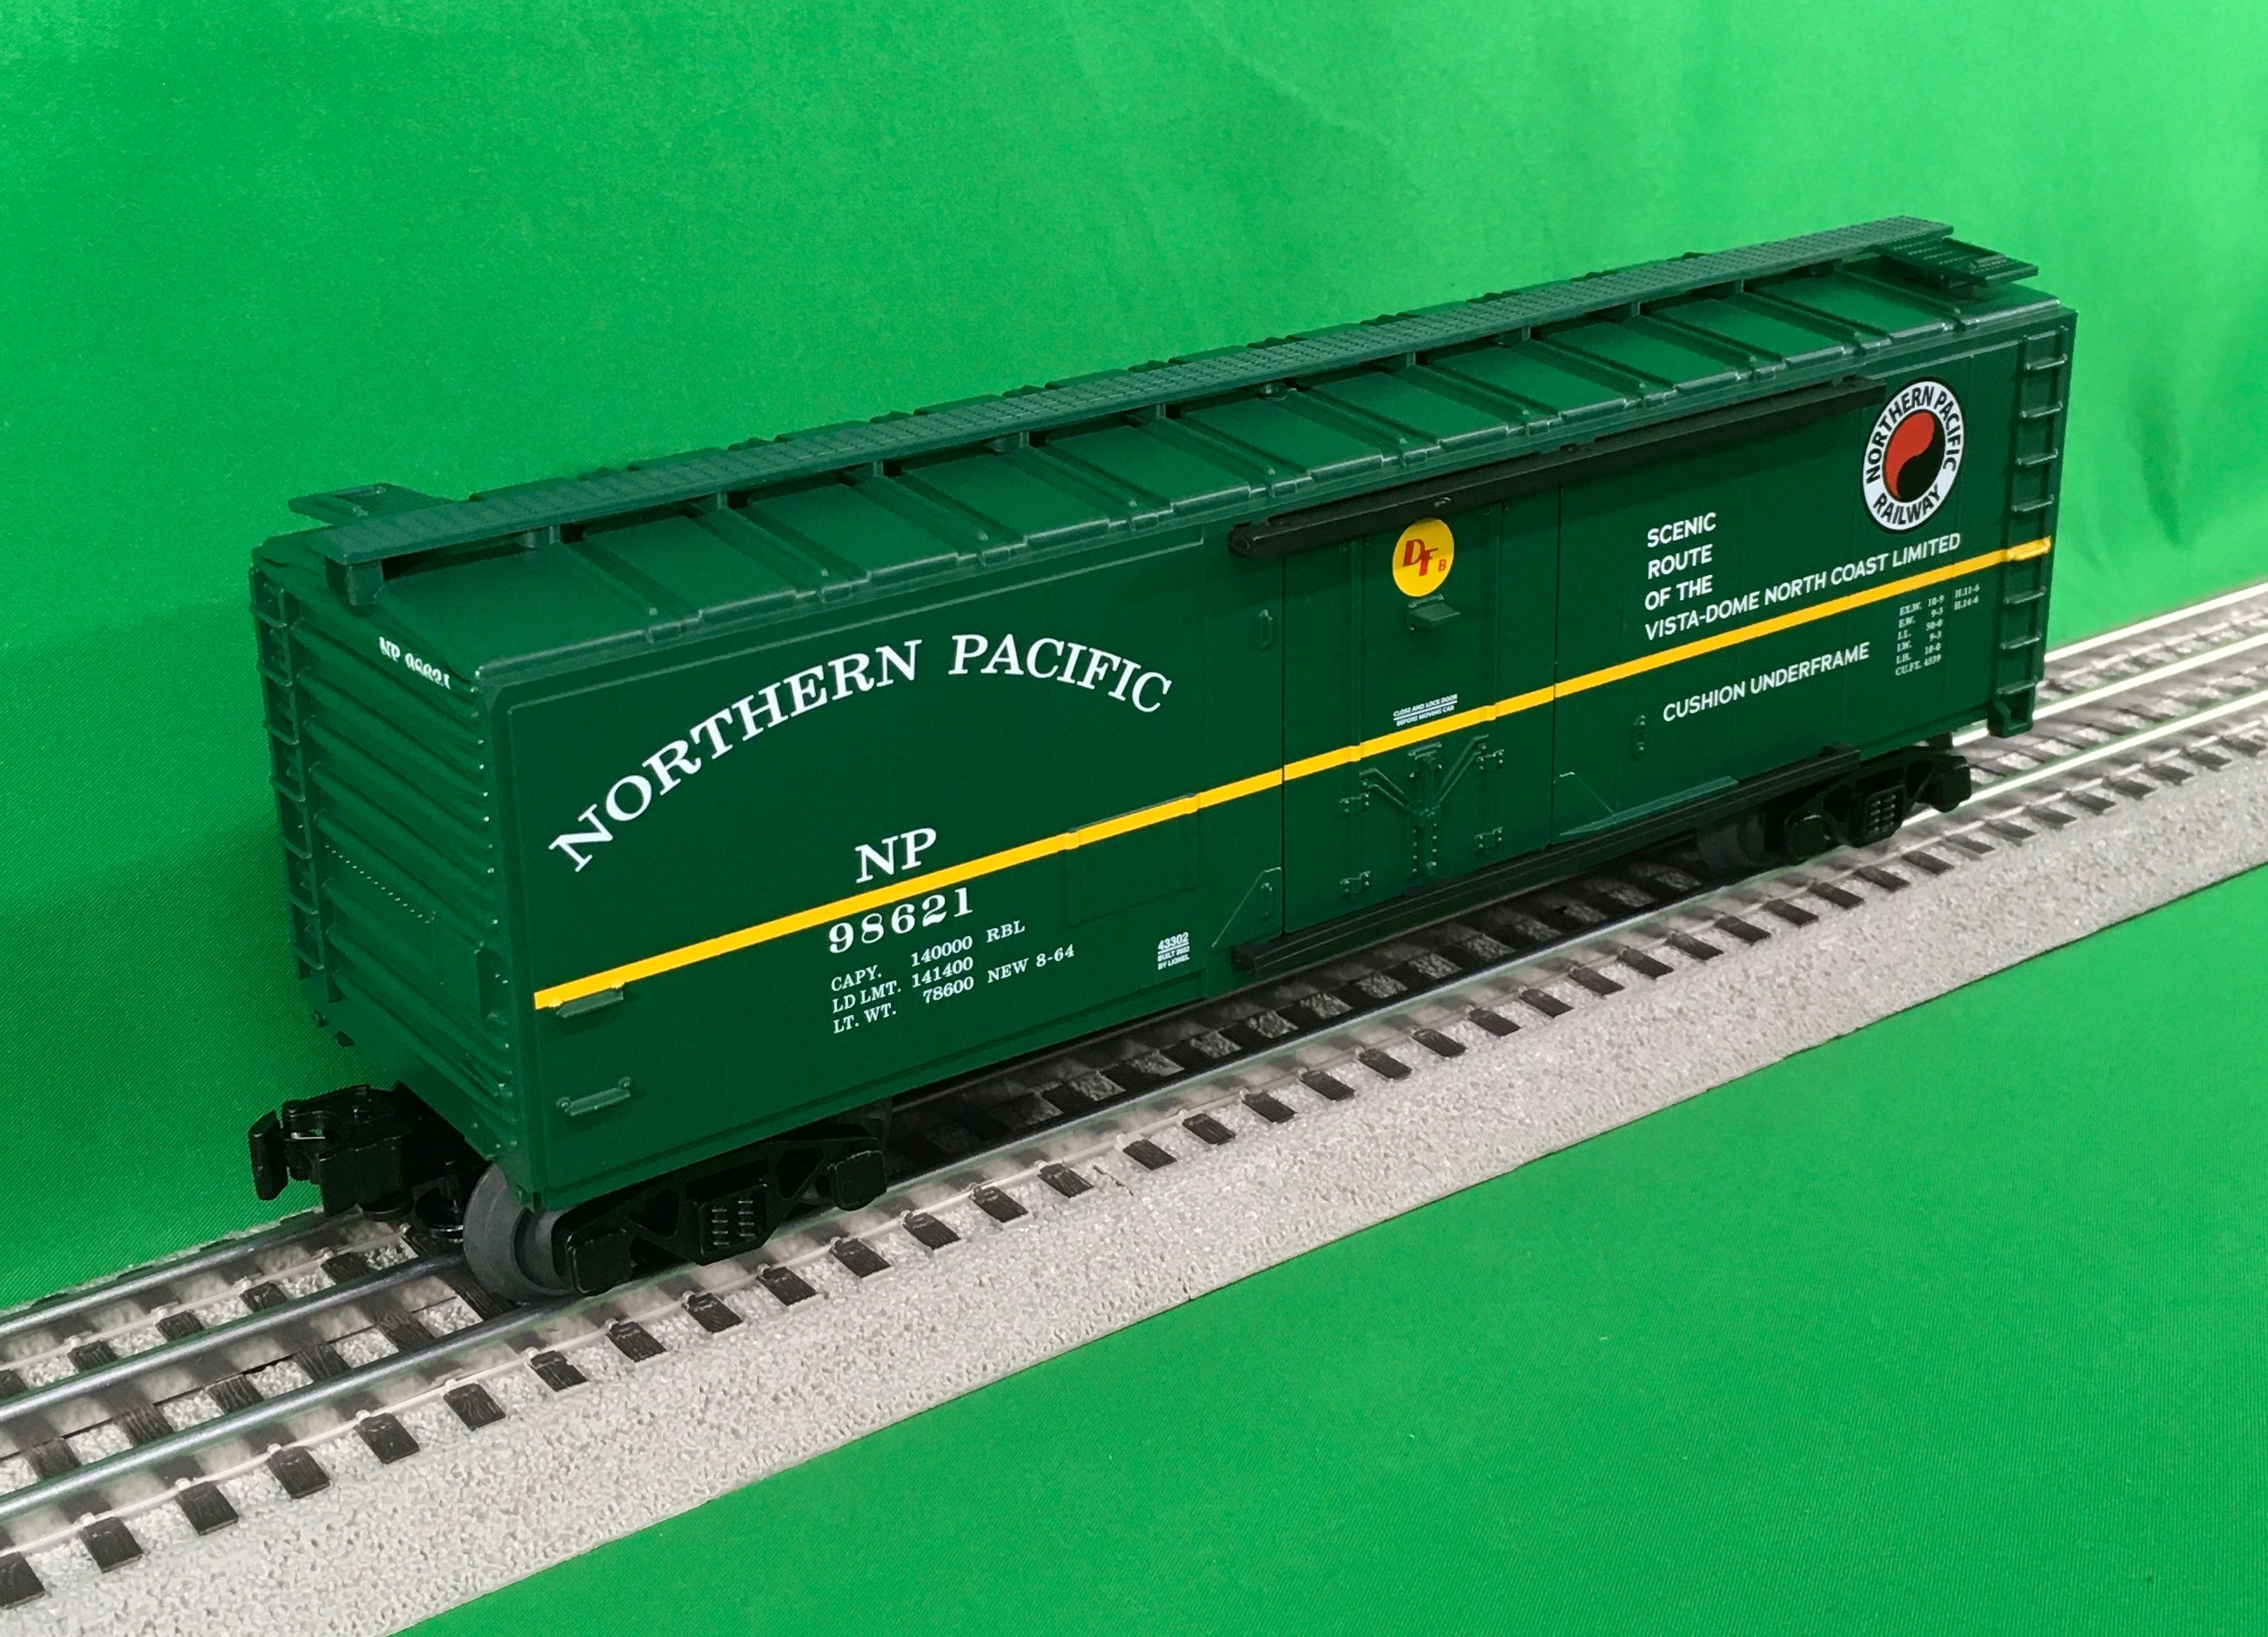 Lionel 2243302 - RBL Reefer Car "Northern Pacific" #98621